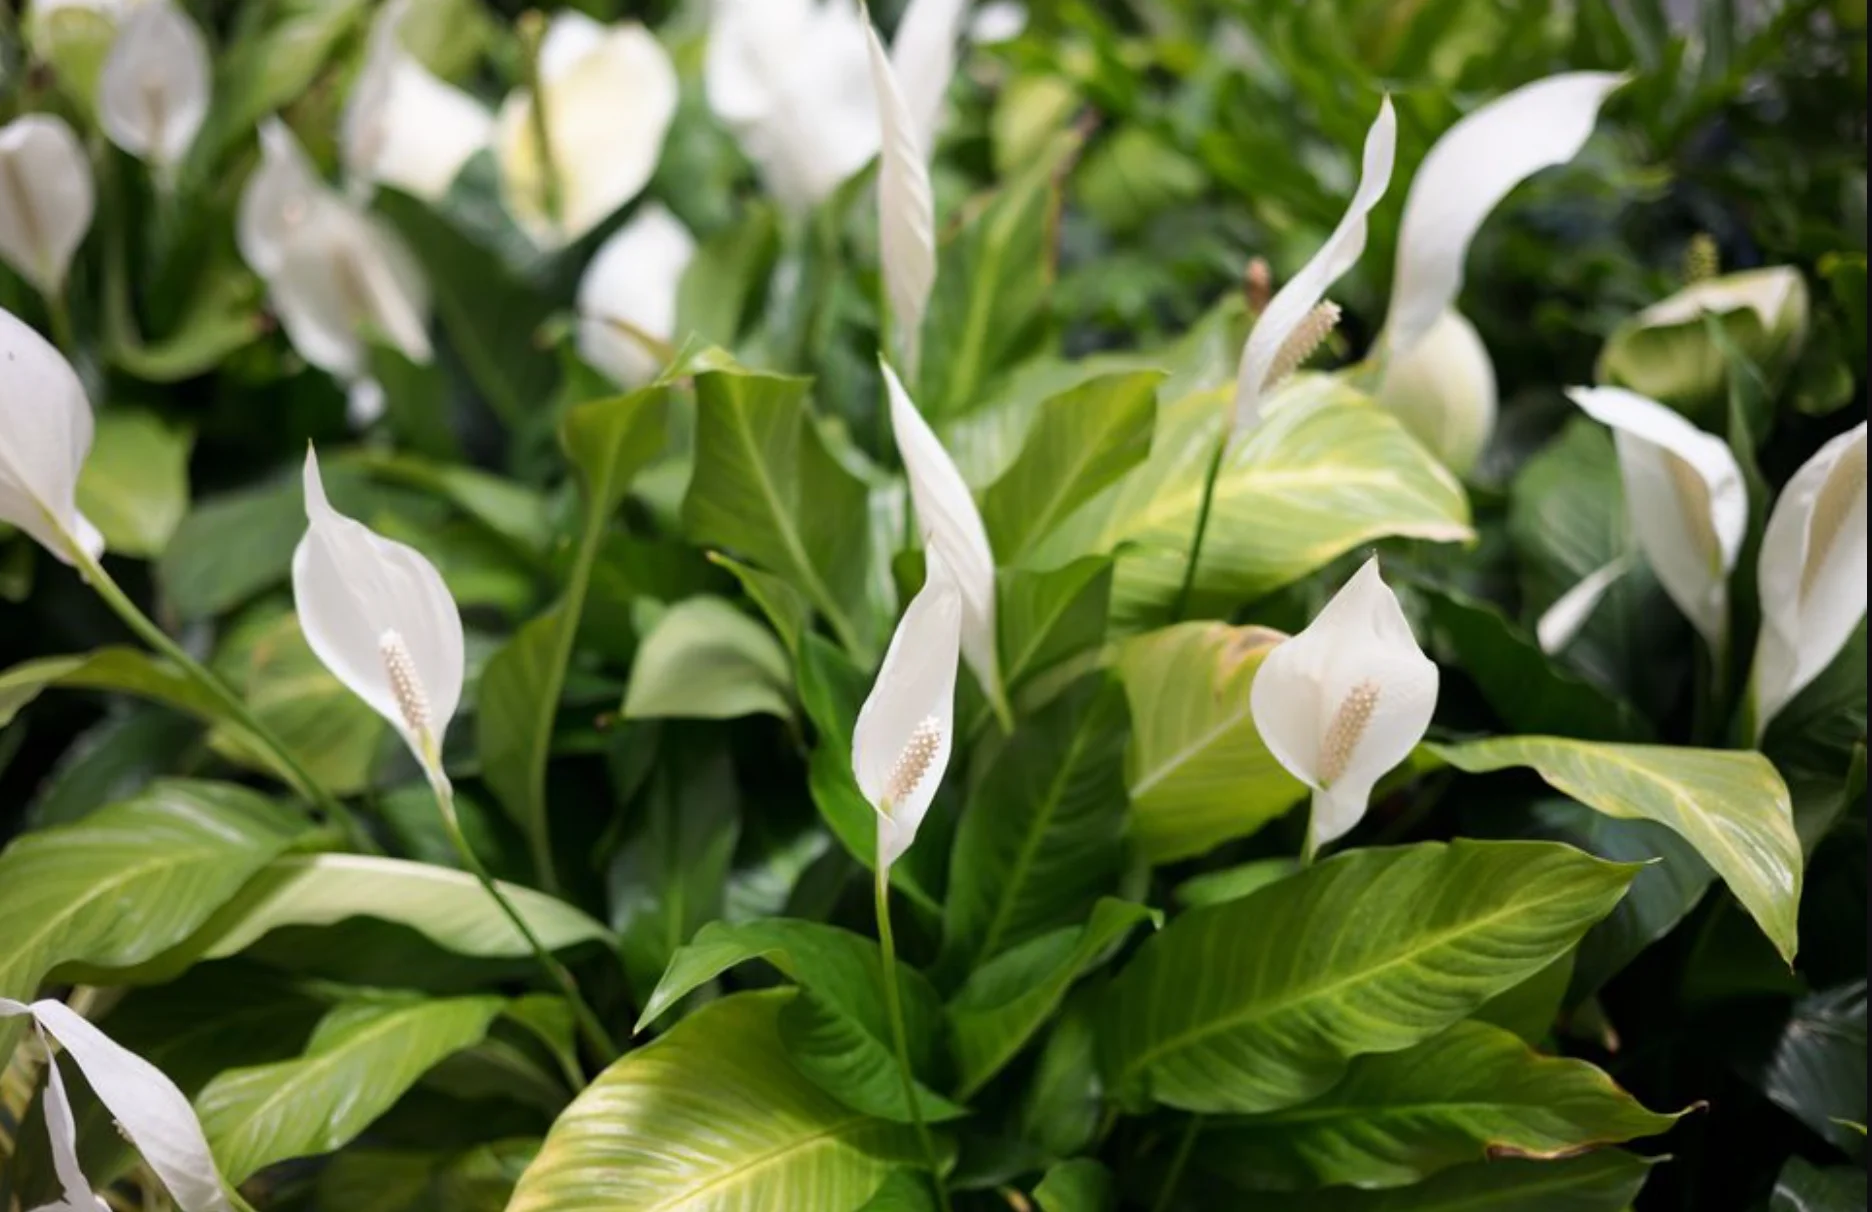 Are peace lilies toxic to dogs?